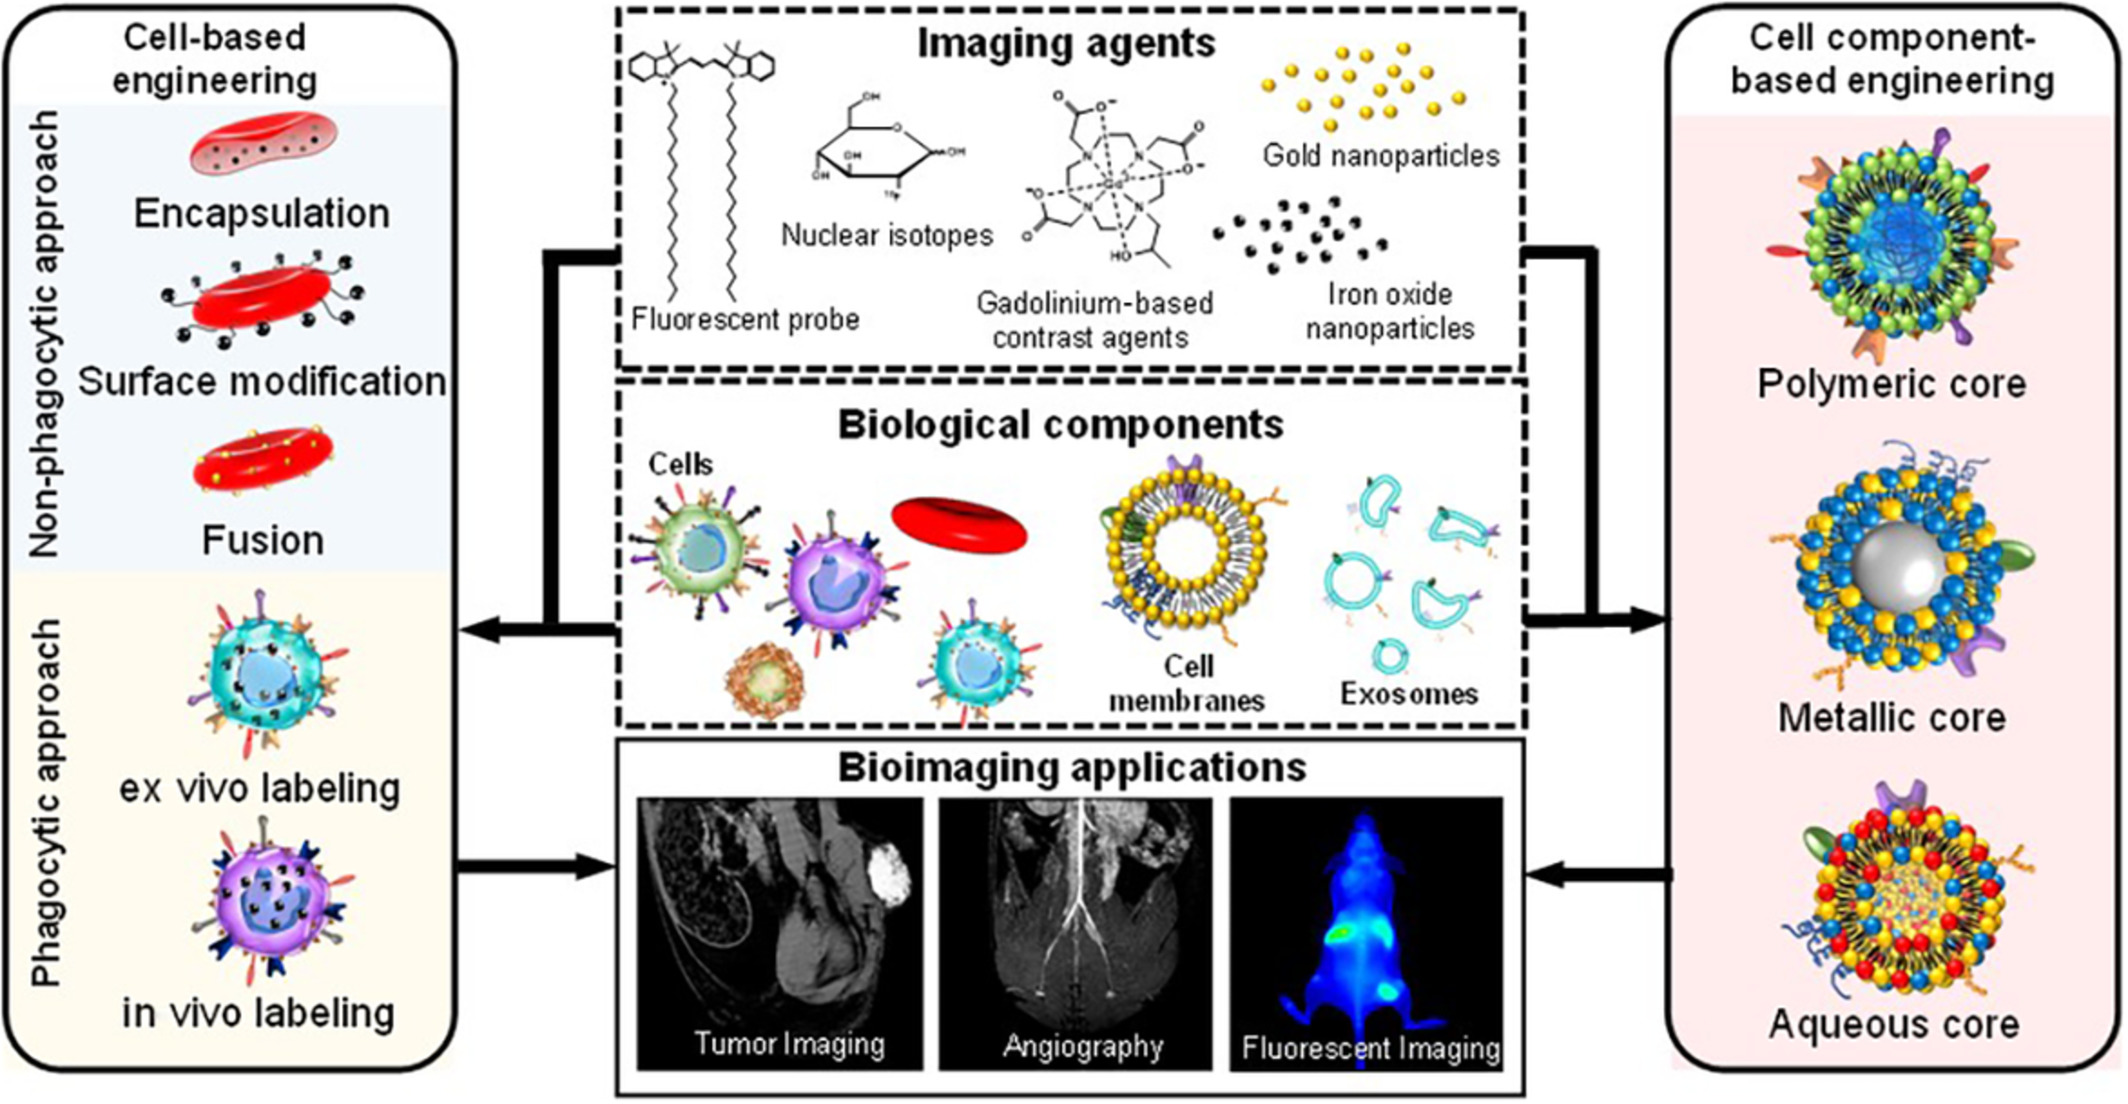 Re‐engineered imaging agent using biomimetic approaches